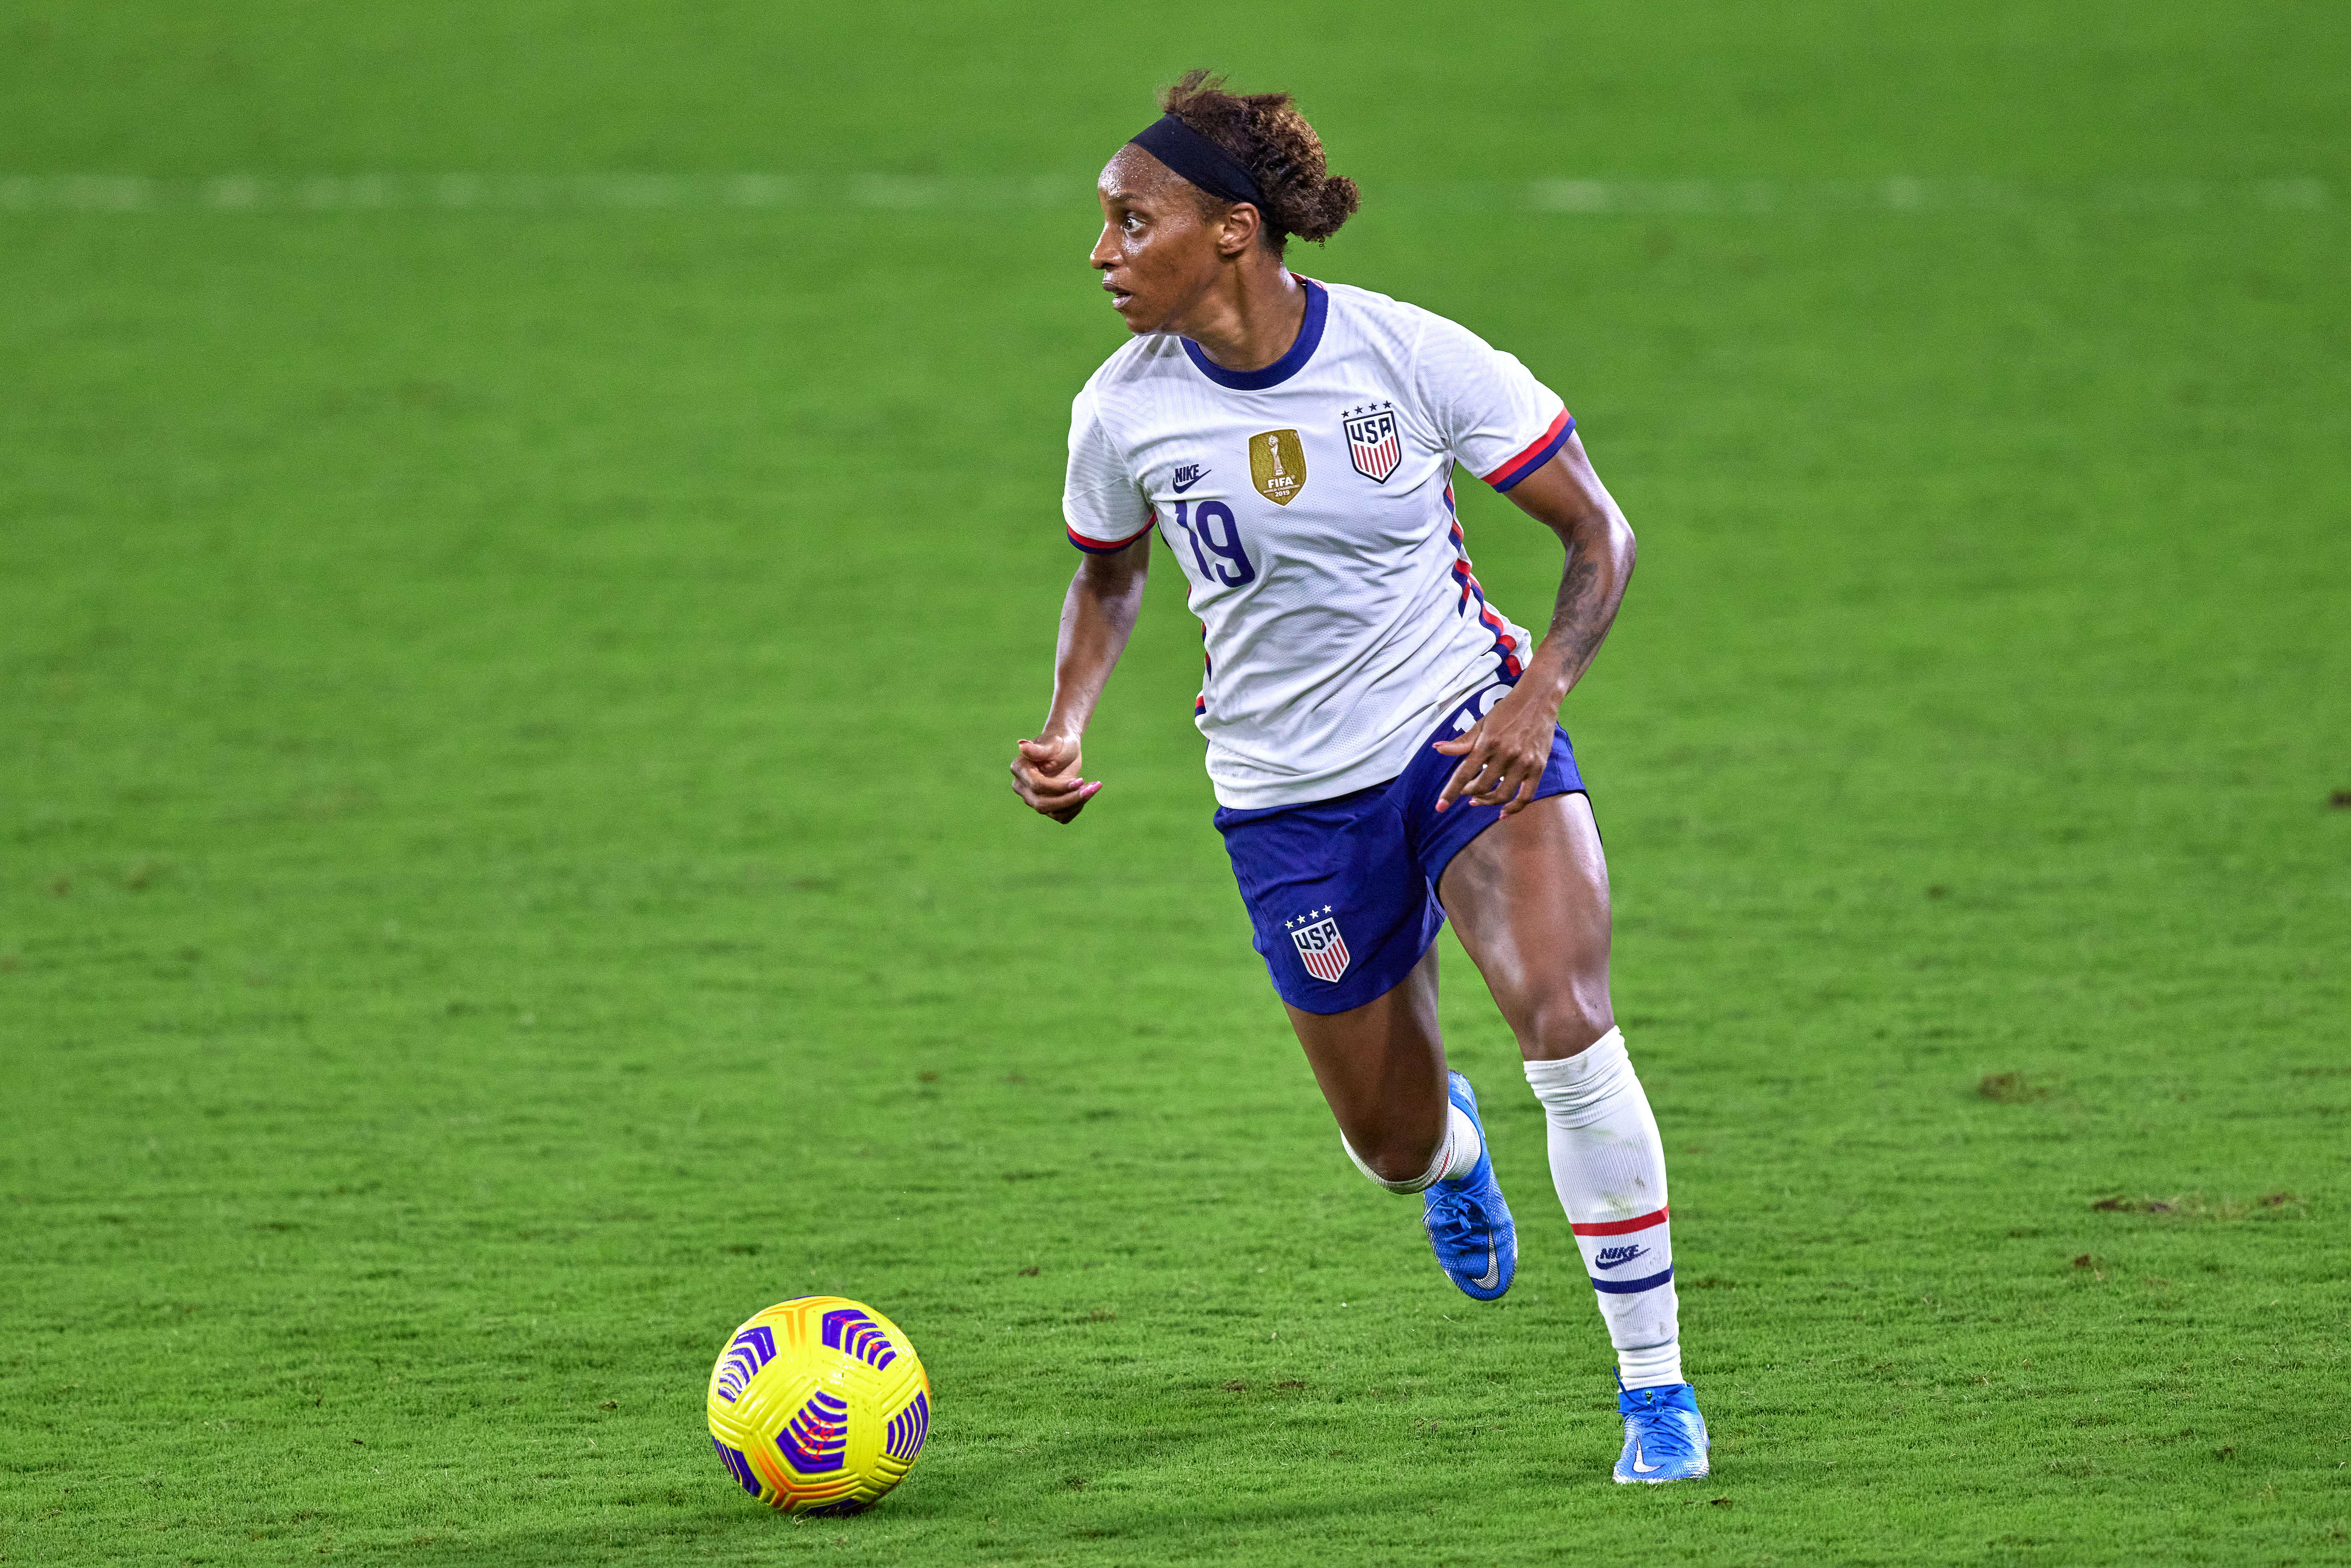 USWNT vs Brazil soccer score updates, time, TV channel, how to watch free live stream online (2/21/2021)